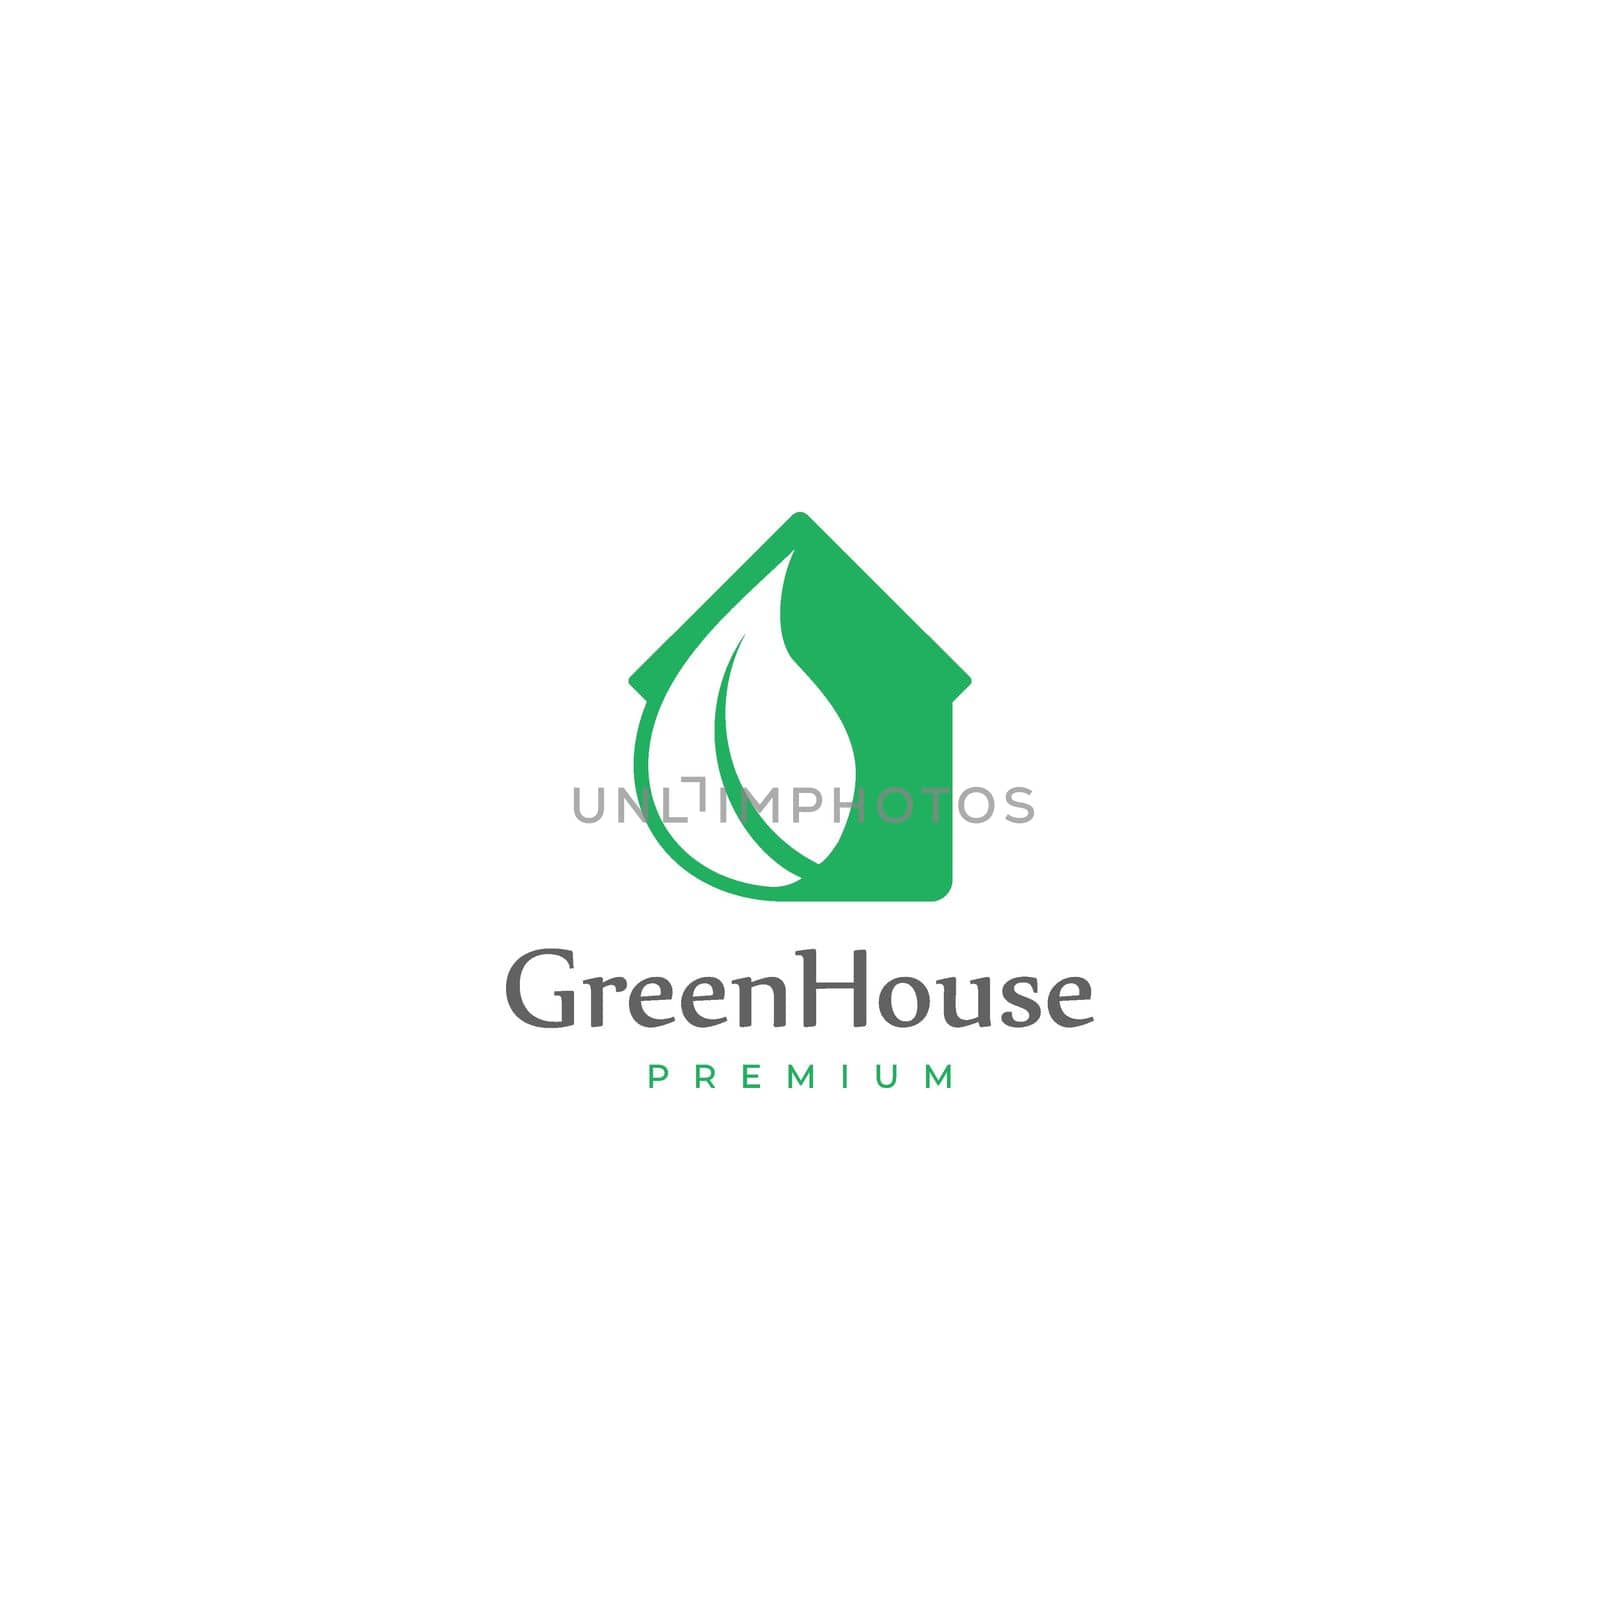 green house with leaf logo. healthy environment sign. organic home vector elements stock illustration by IreIru